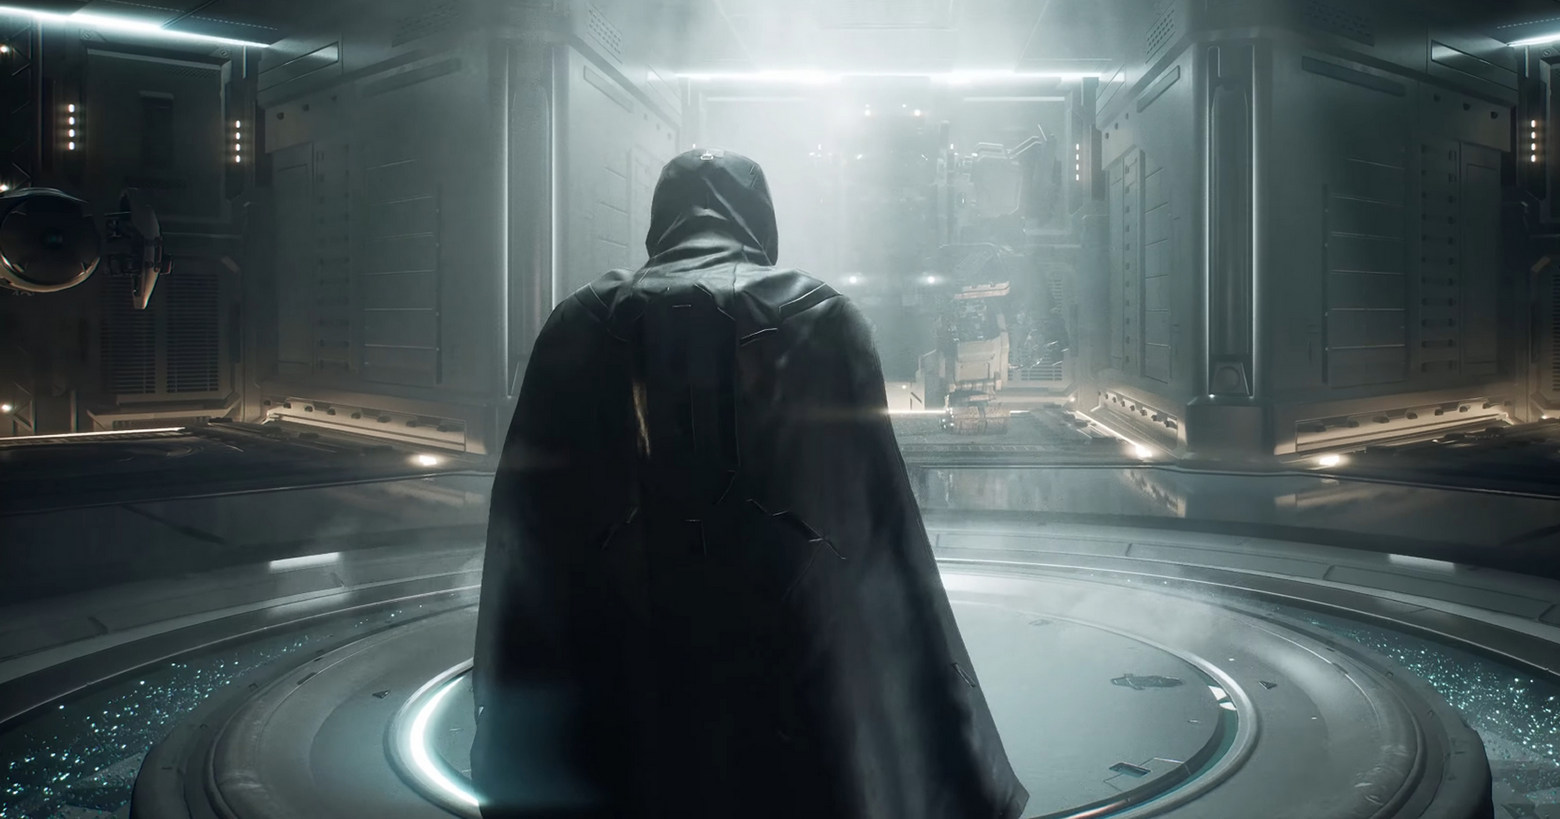 Here we see a screenshot from NCsoft's new LLL game, on which the protagonist can be seen from behind in a dark robe in third person view, as he just walks through a futuristic room, which is illuminated from above by a bright white light. In the middle of the round room, there is also a round platform, towards which the Main Character is walking. There are corridors to the right and left, and in the background of the image in front of the character, a robot-like structure can be guessed slightly. The MMORPG offers exciting gameplay and is a sci-fi shooter.